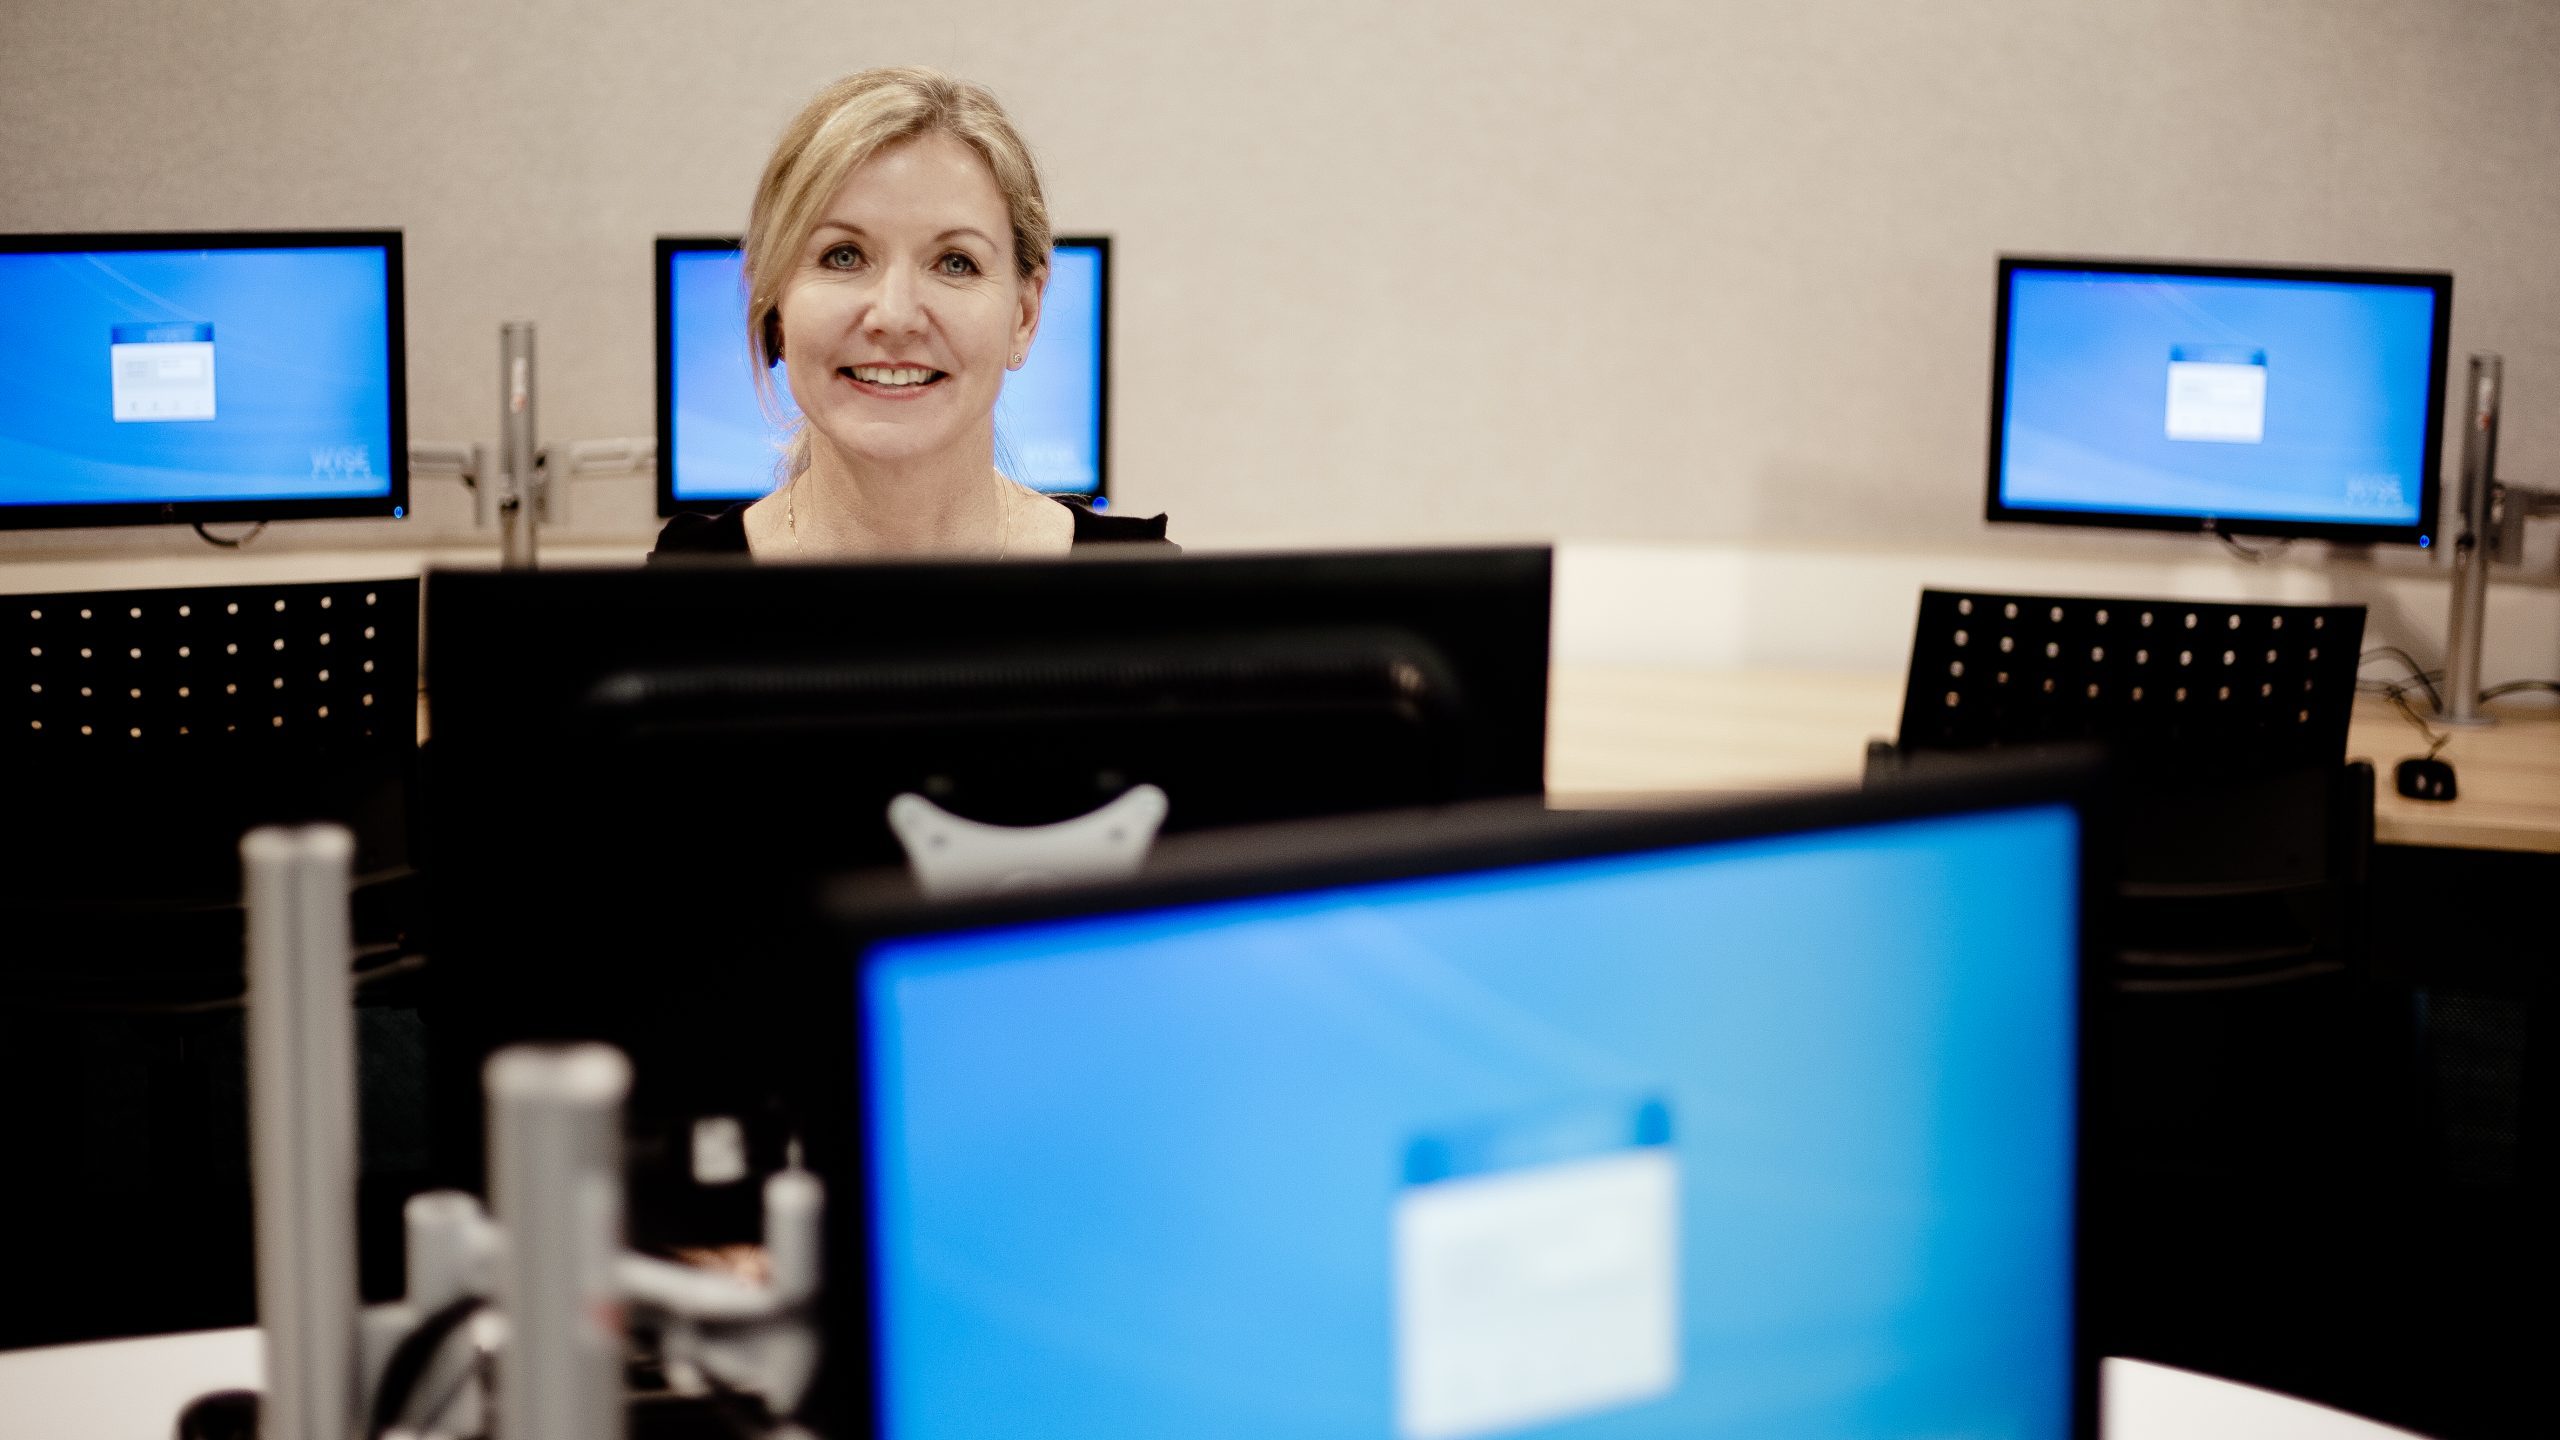 ergonomic monitor mounts designed for Contact and call centres